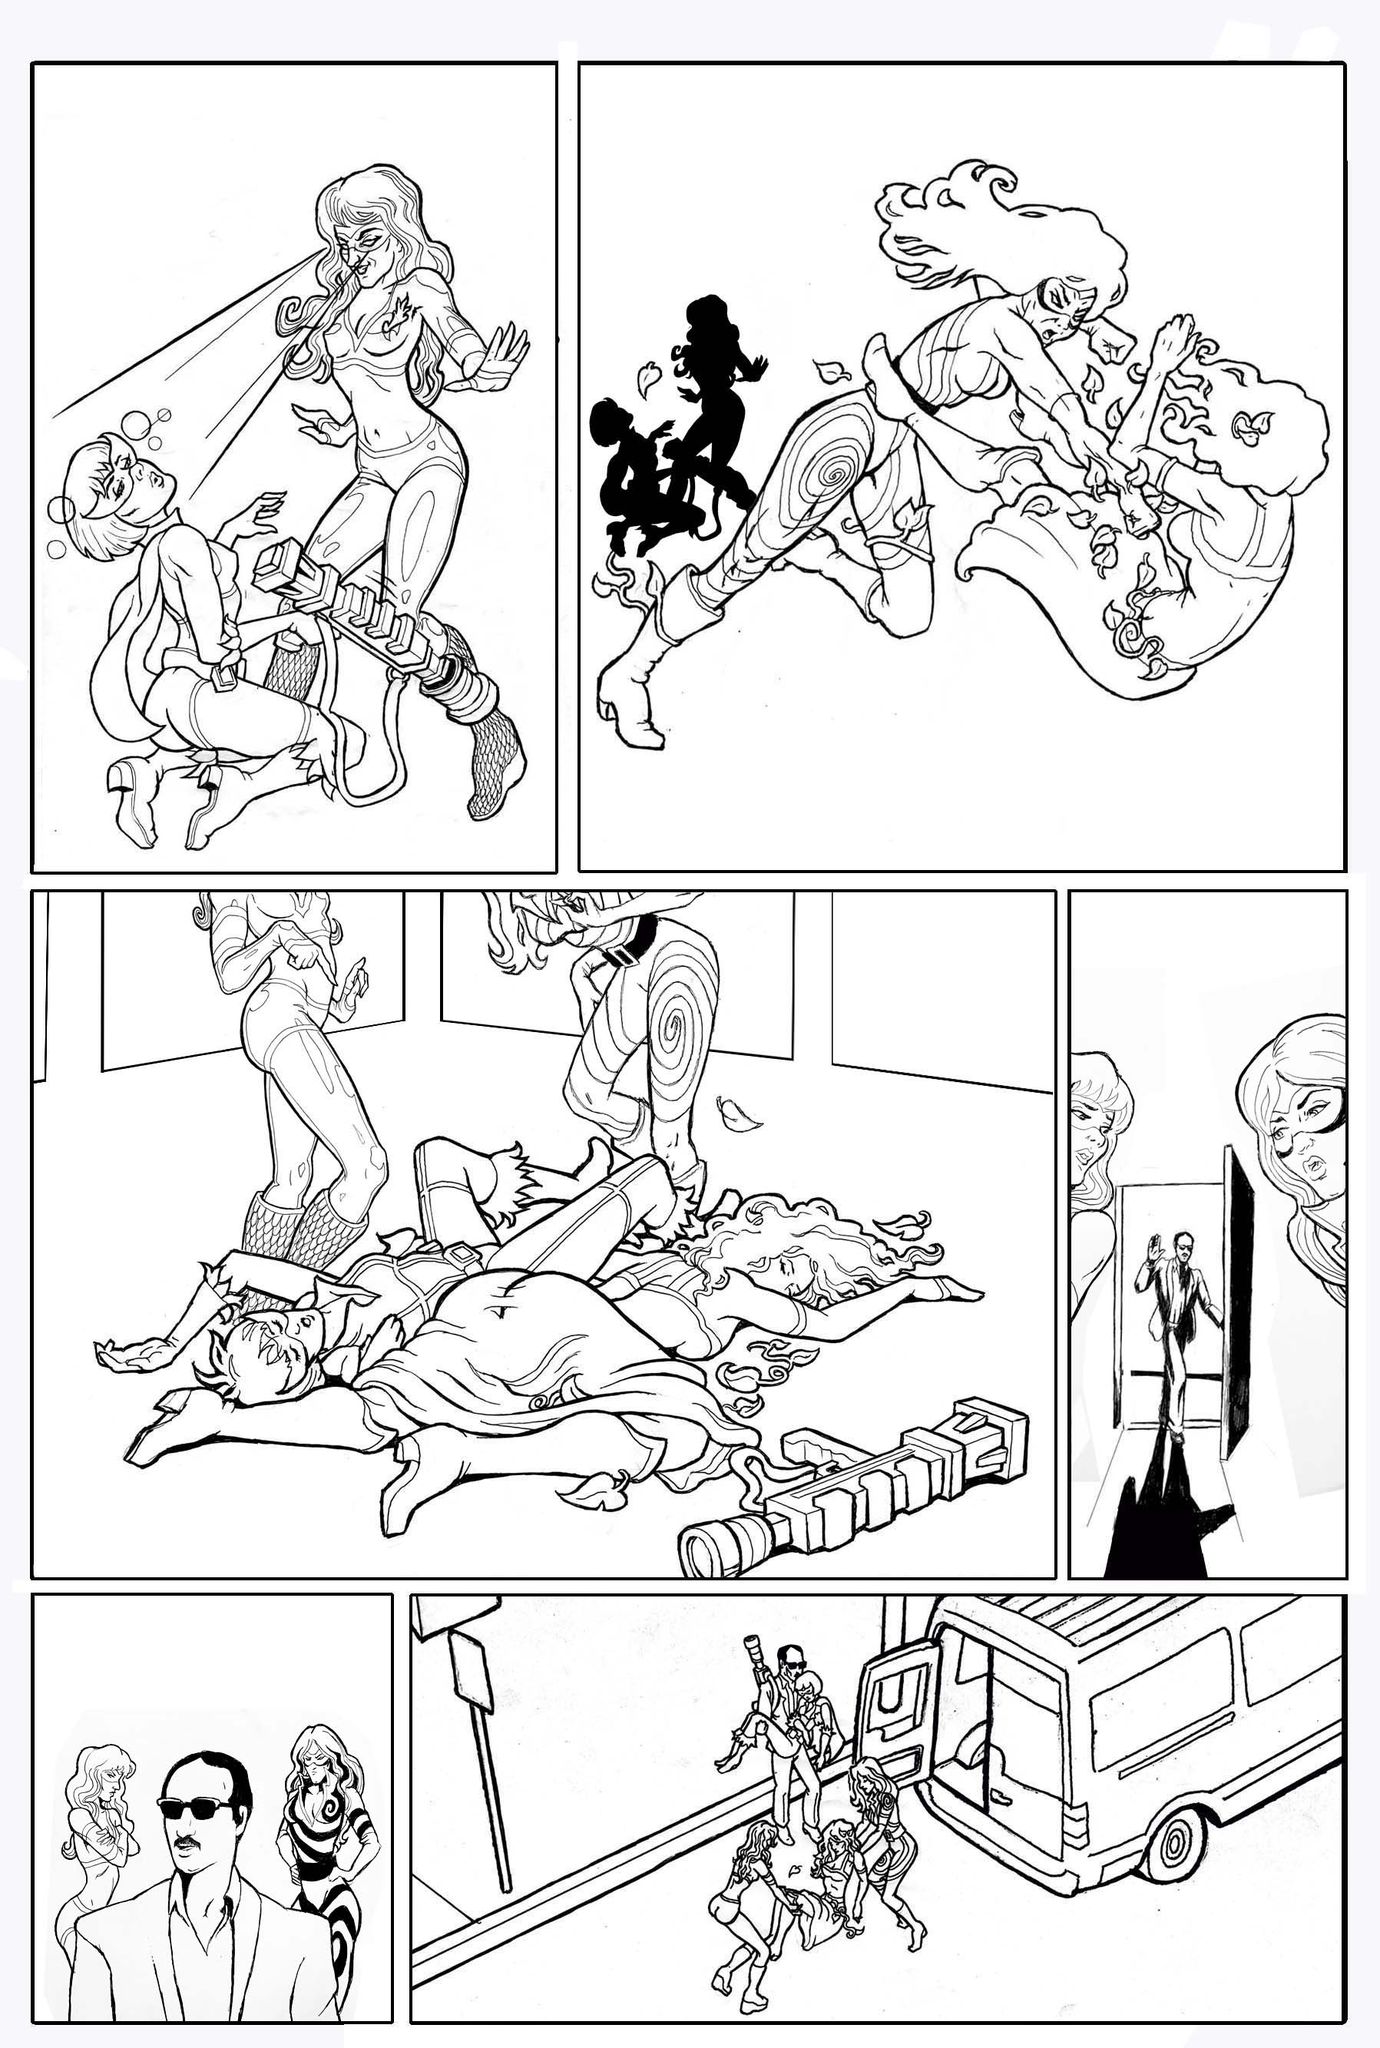 Ben page 8 inked with additions.jpg